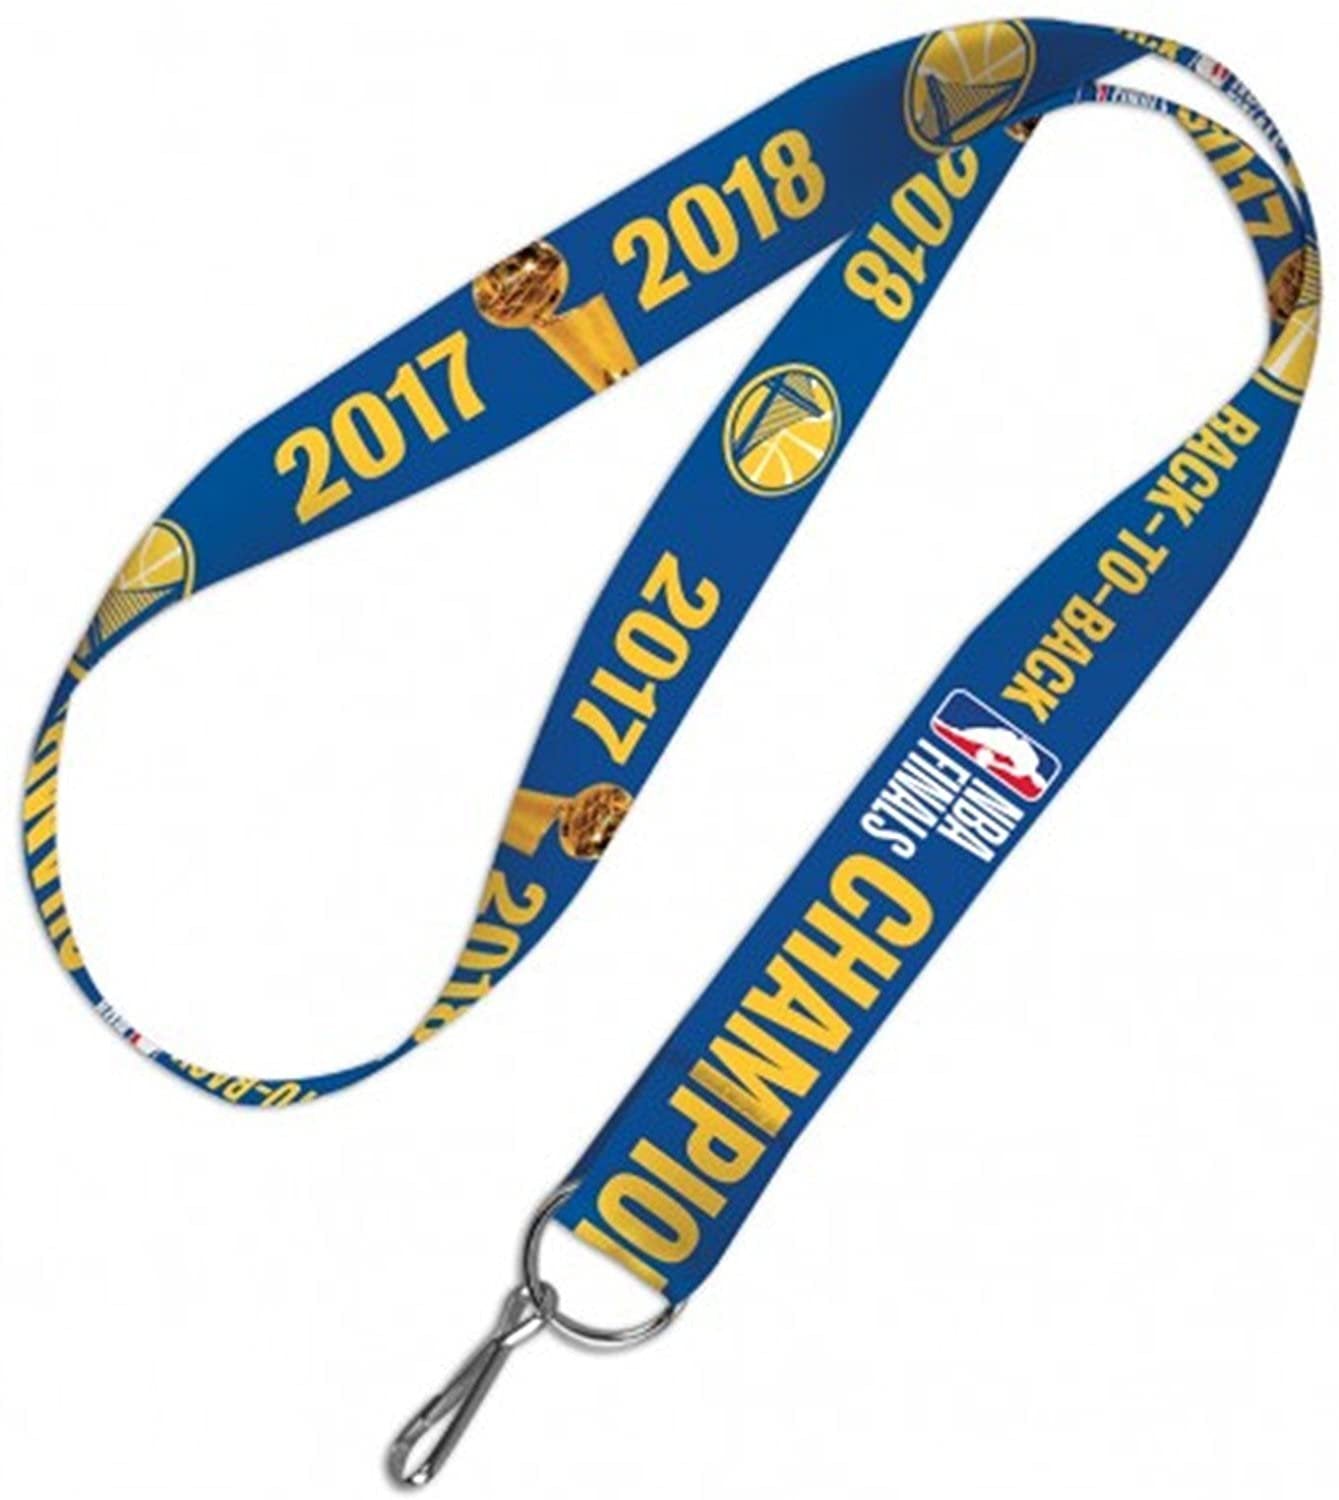 Golden State Warriors 2018 Champions Lanyard Premium 2-Sided Keychain with Hook Basketball